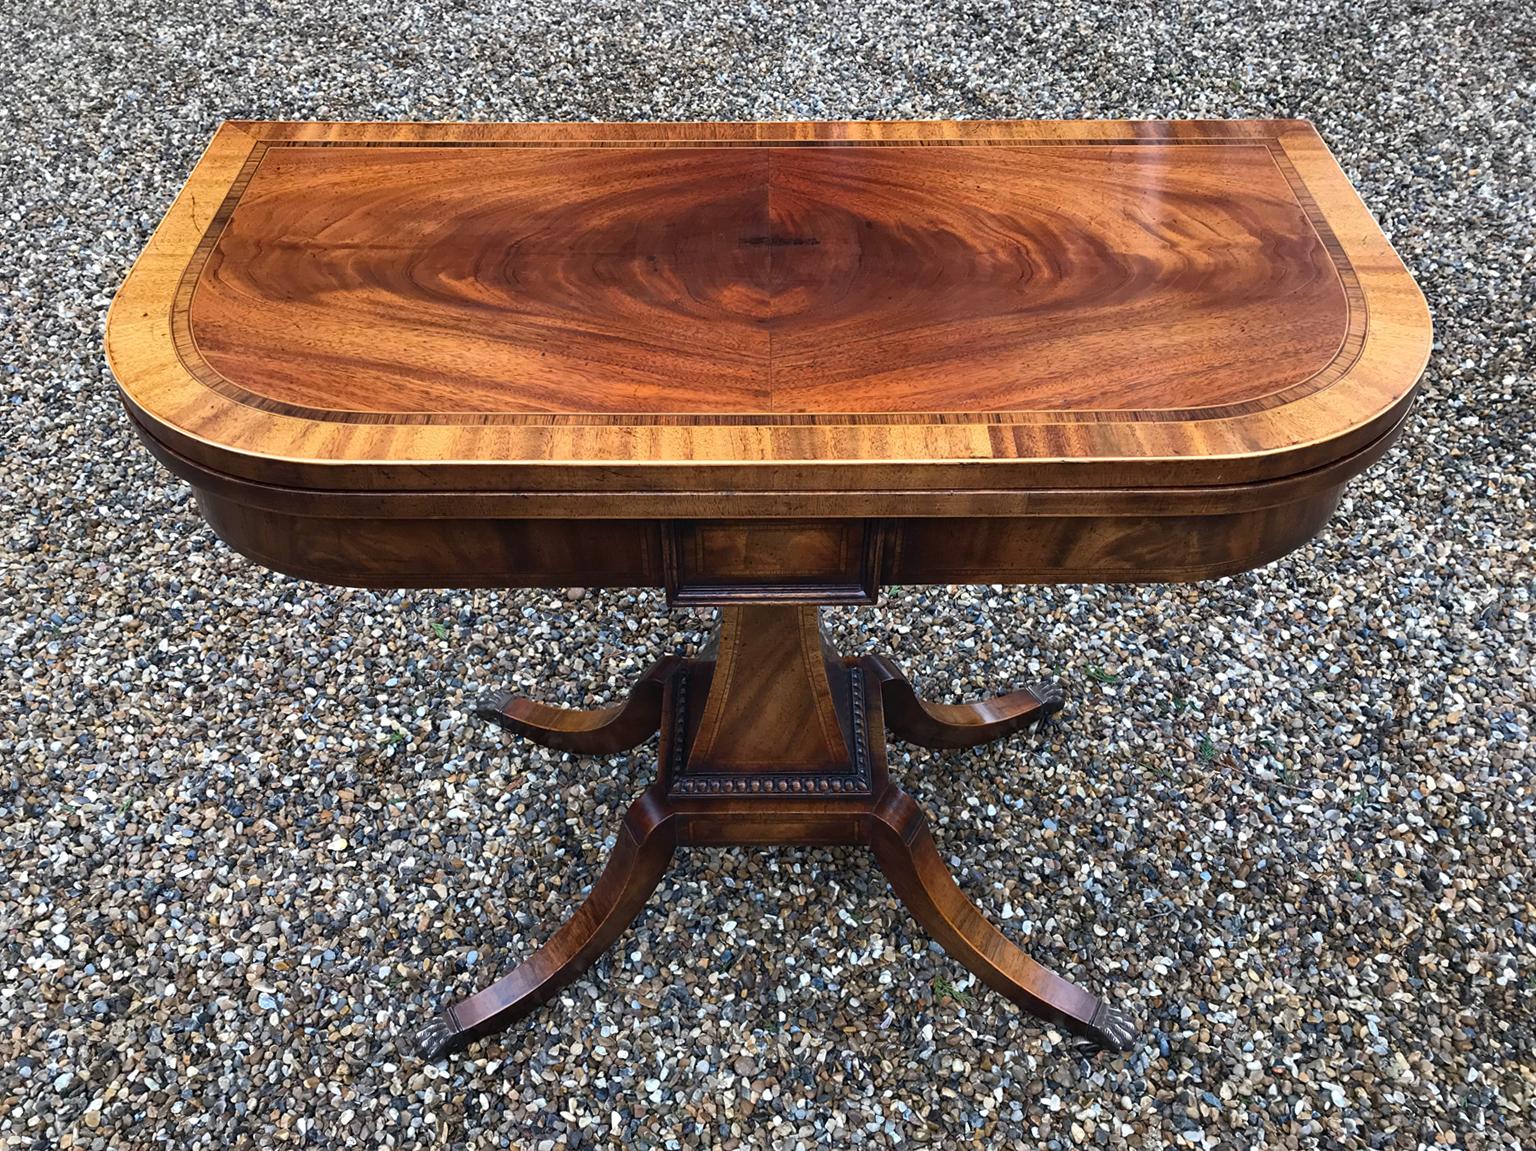 Hand-Crafted 19th Century Regency Mahogany Inlaid Crossbanded Card Table with Splayed Legs